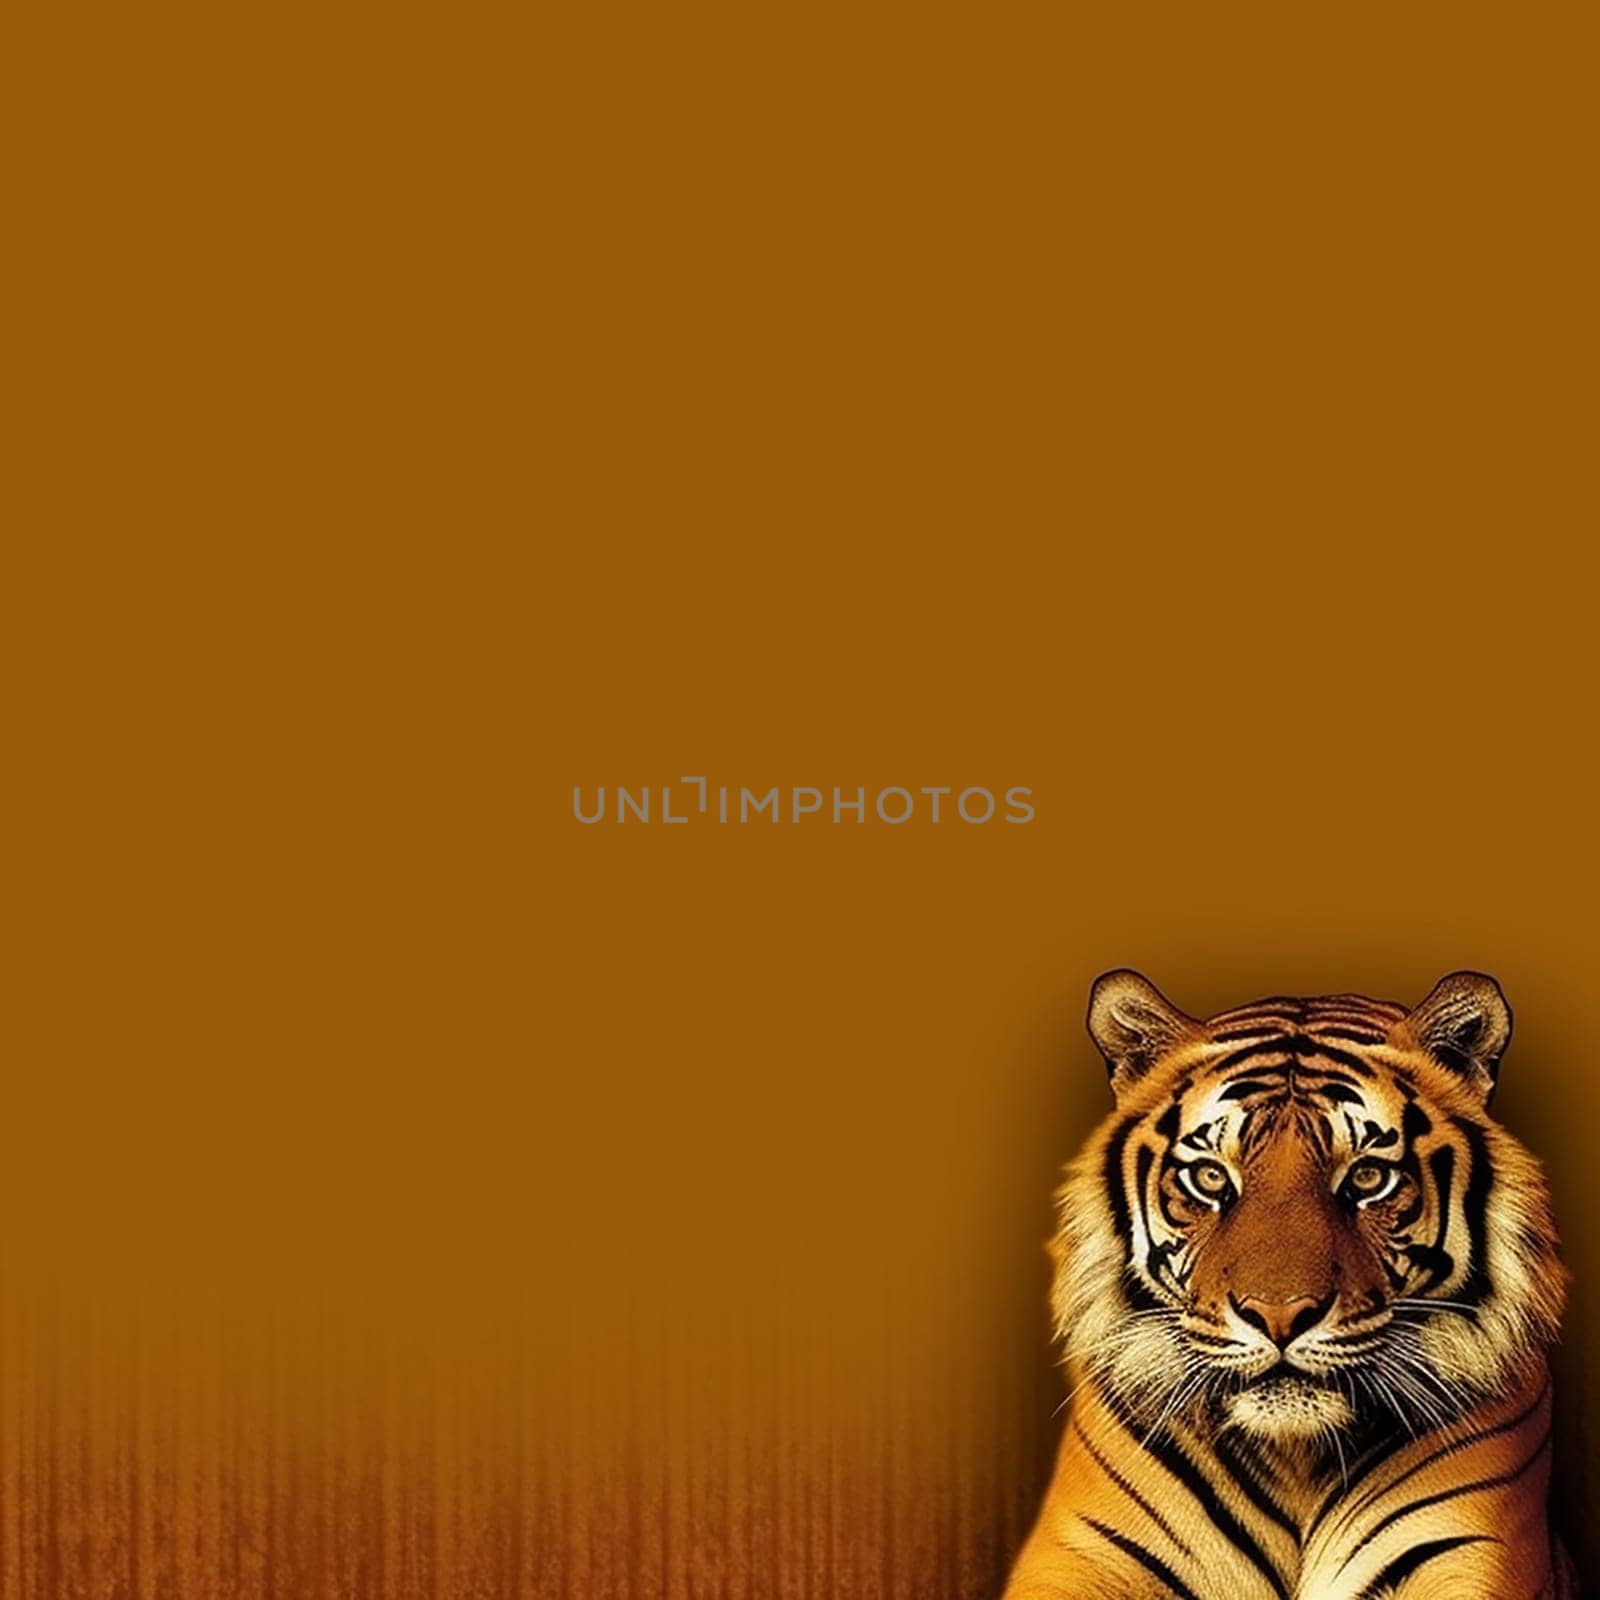 A wild tiger on a neutral color background